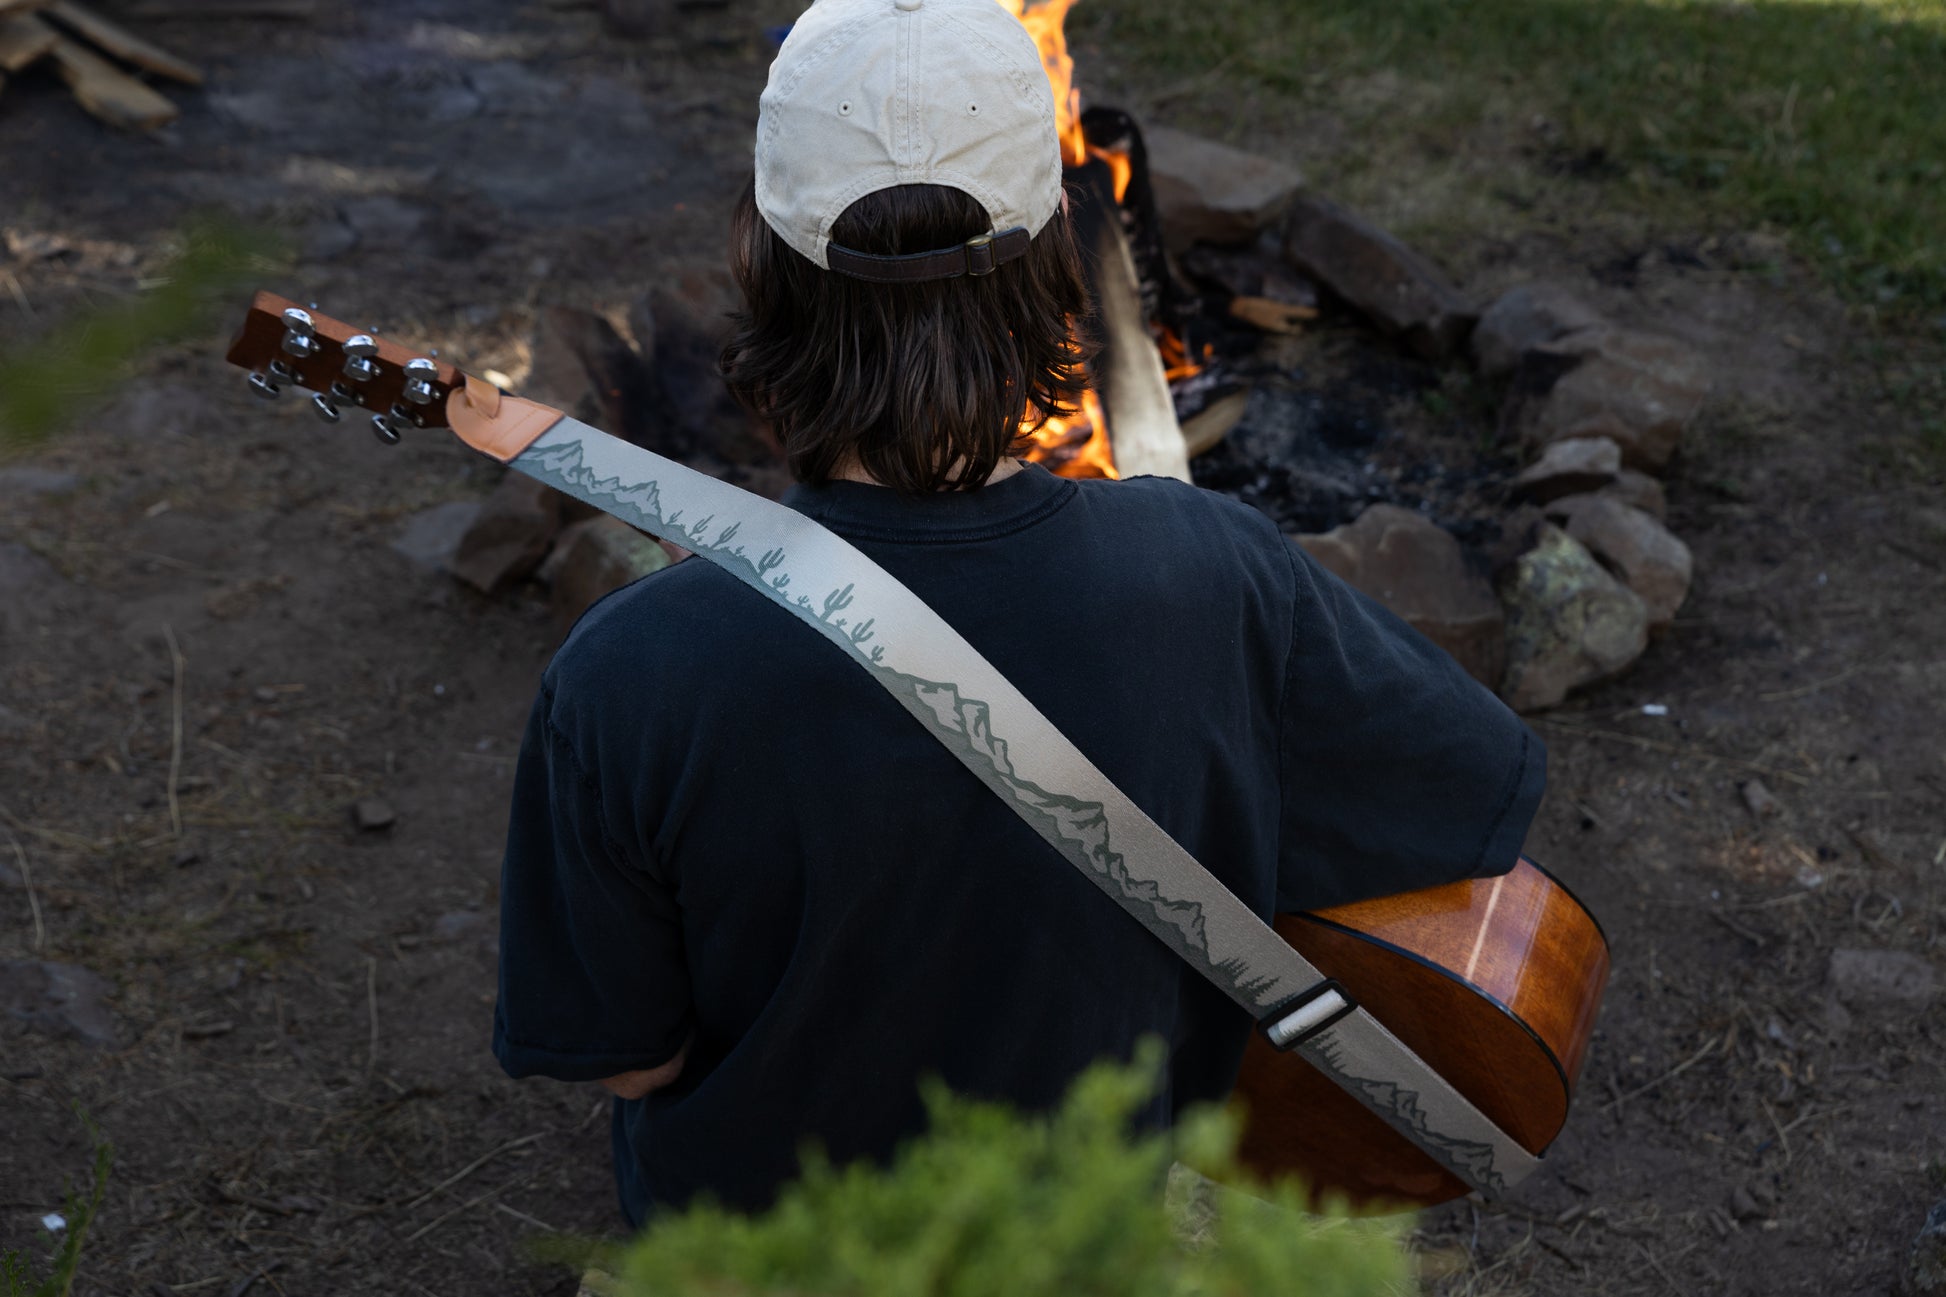 Landscape guitar strap Mountain trees and cactus design outside around a campfire playing guitar